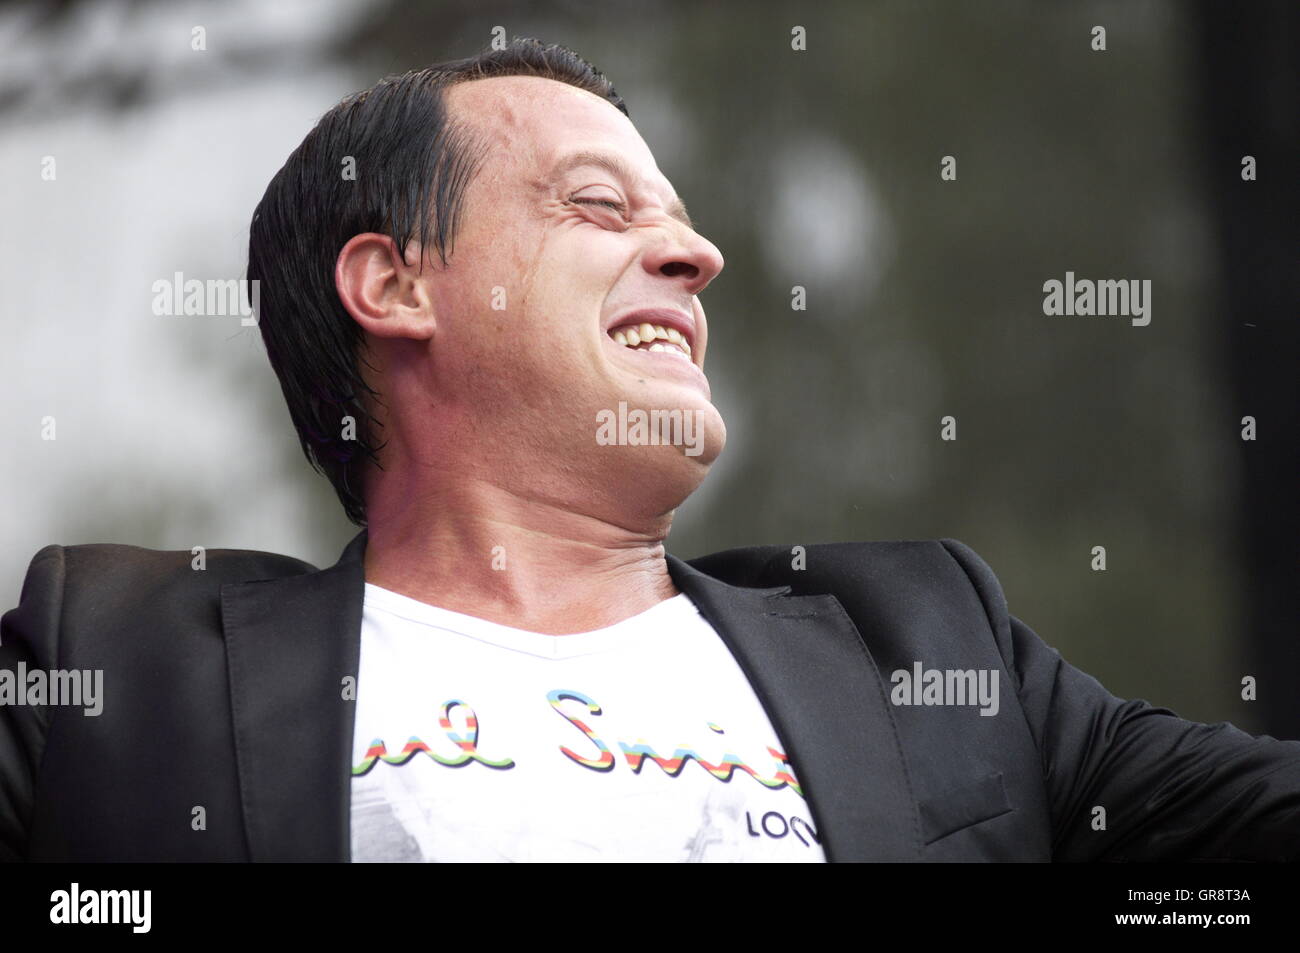 Pop Star Gregor Glanz On The Pop And Oldies Stage Stock Photo